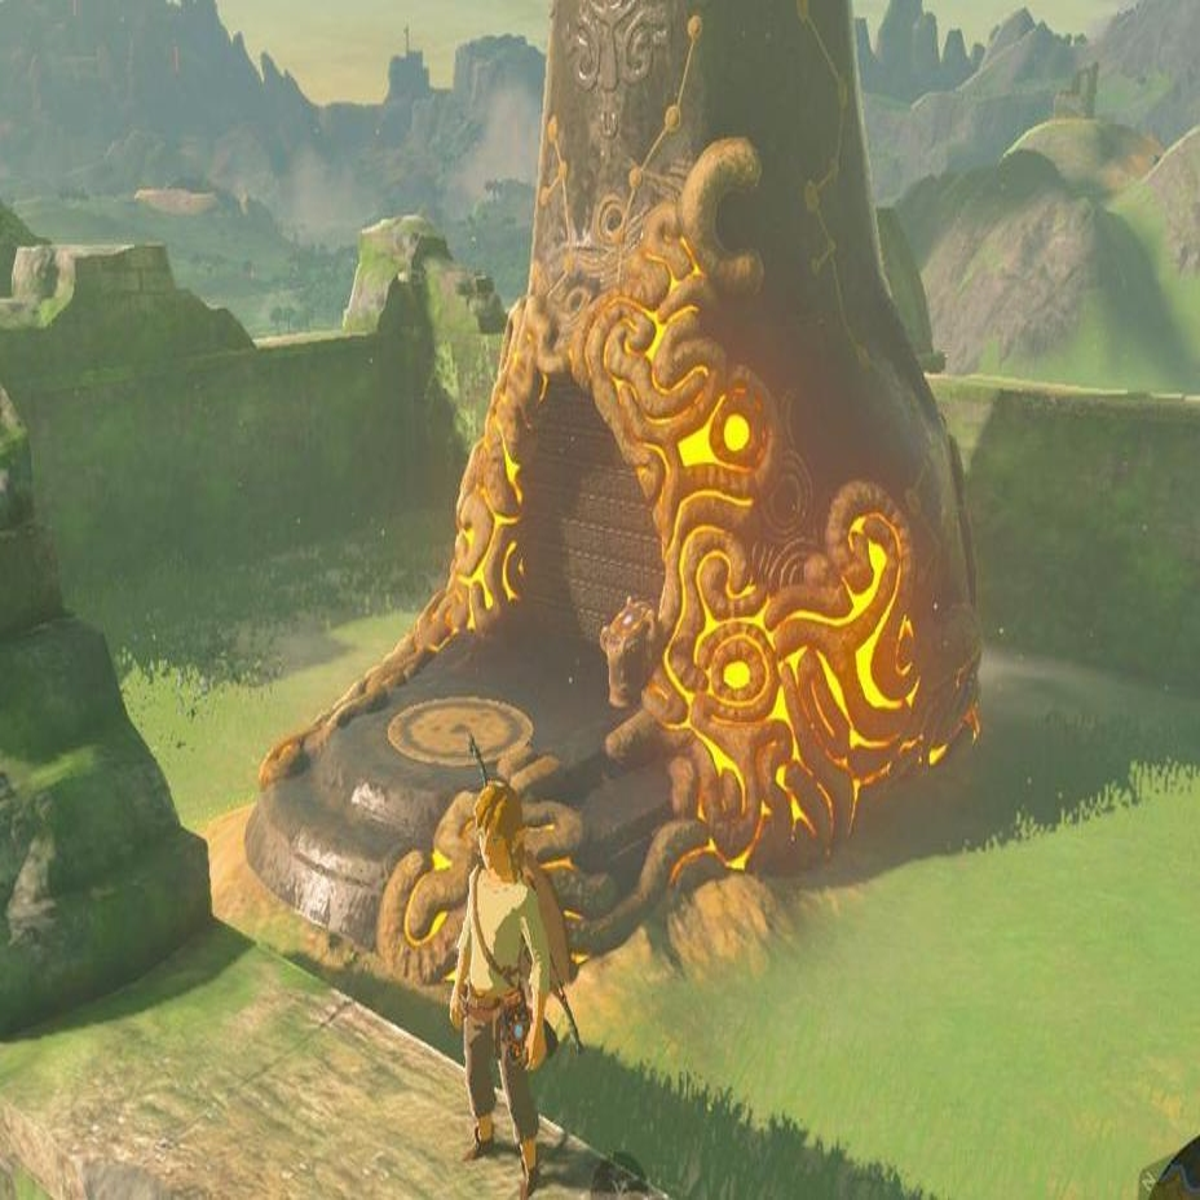 Zelda: Breath of the Wild shrine maps and locations